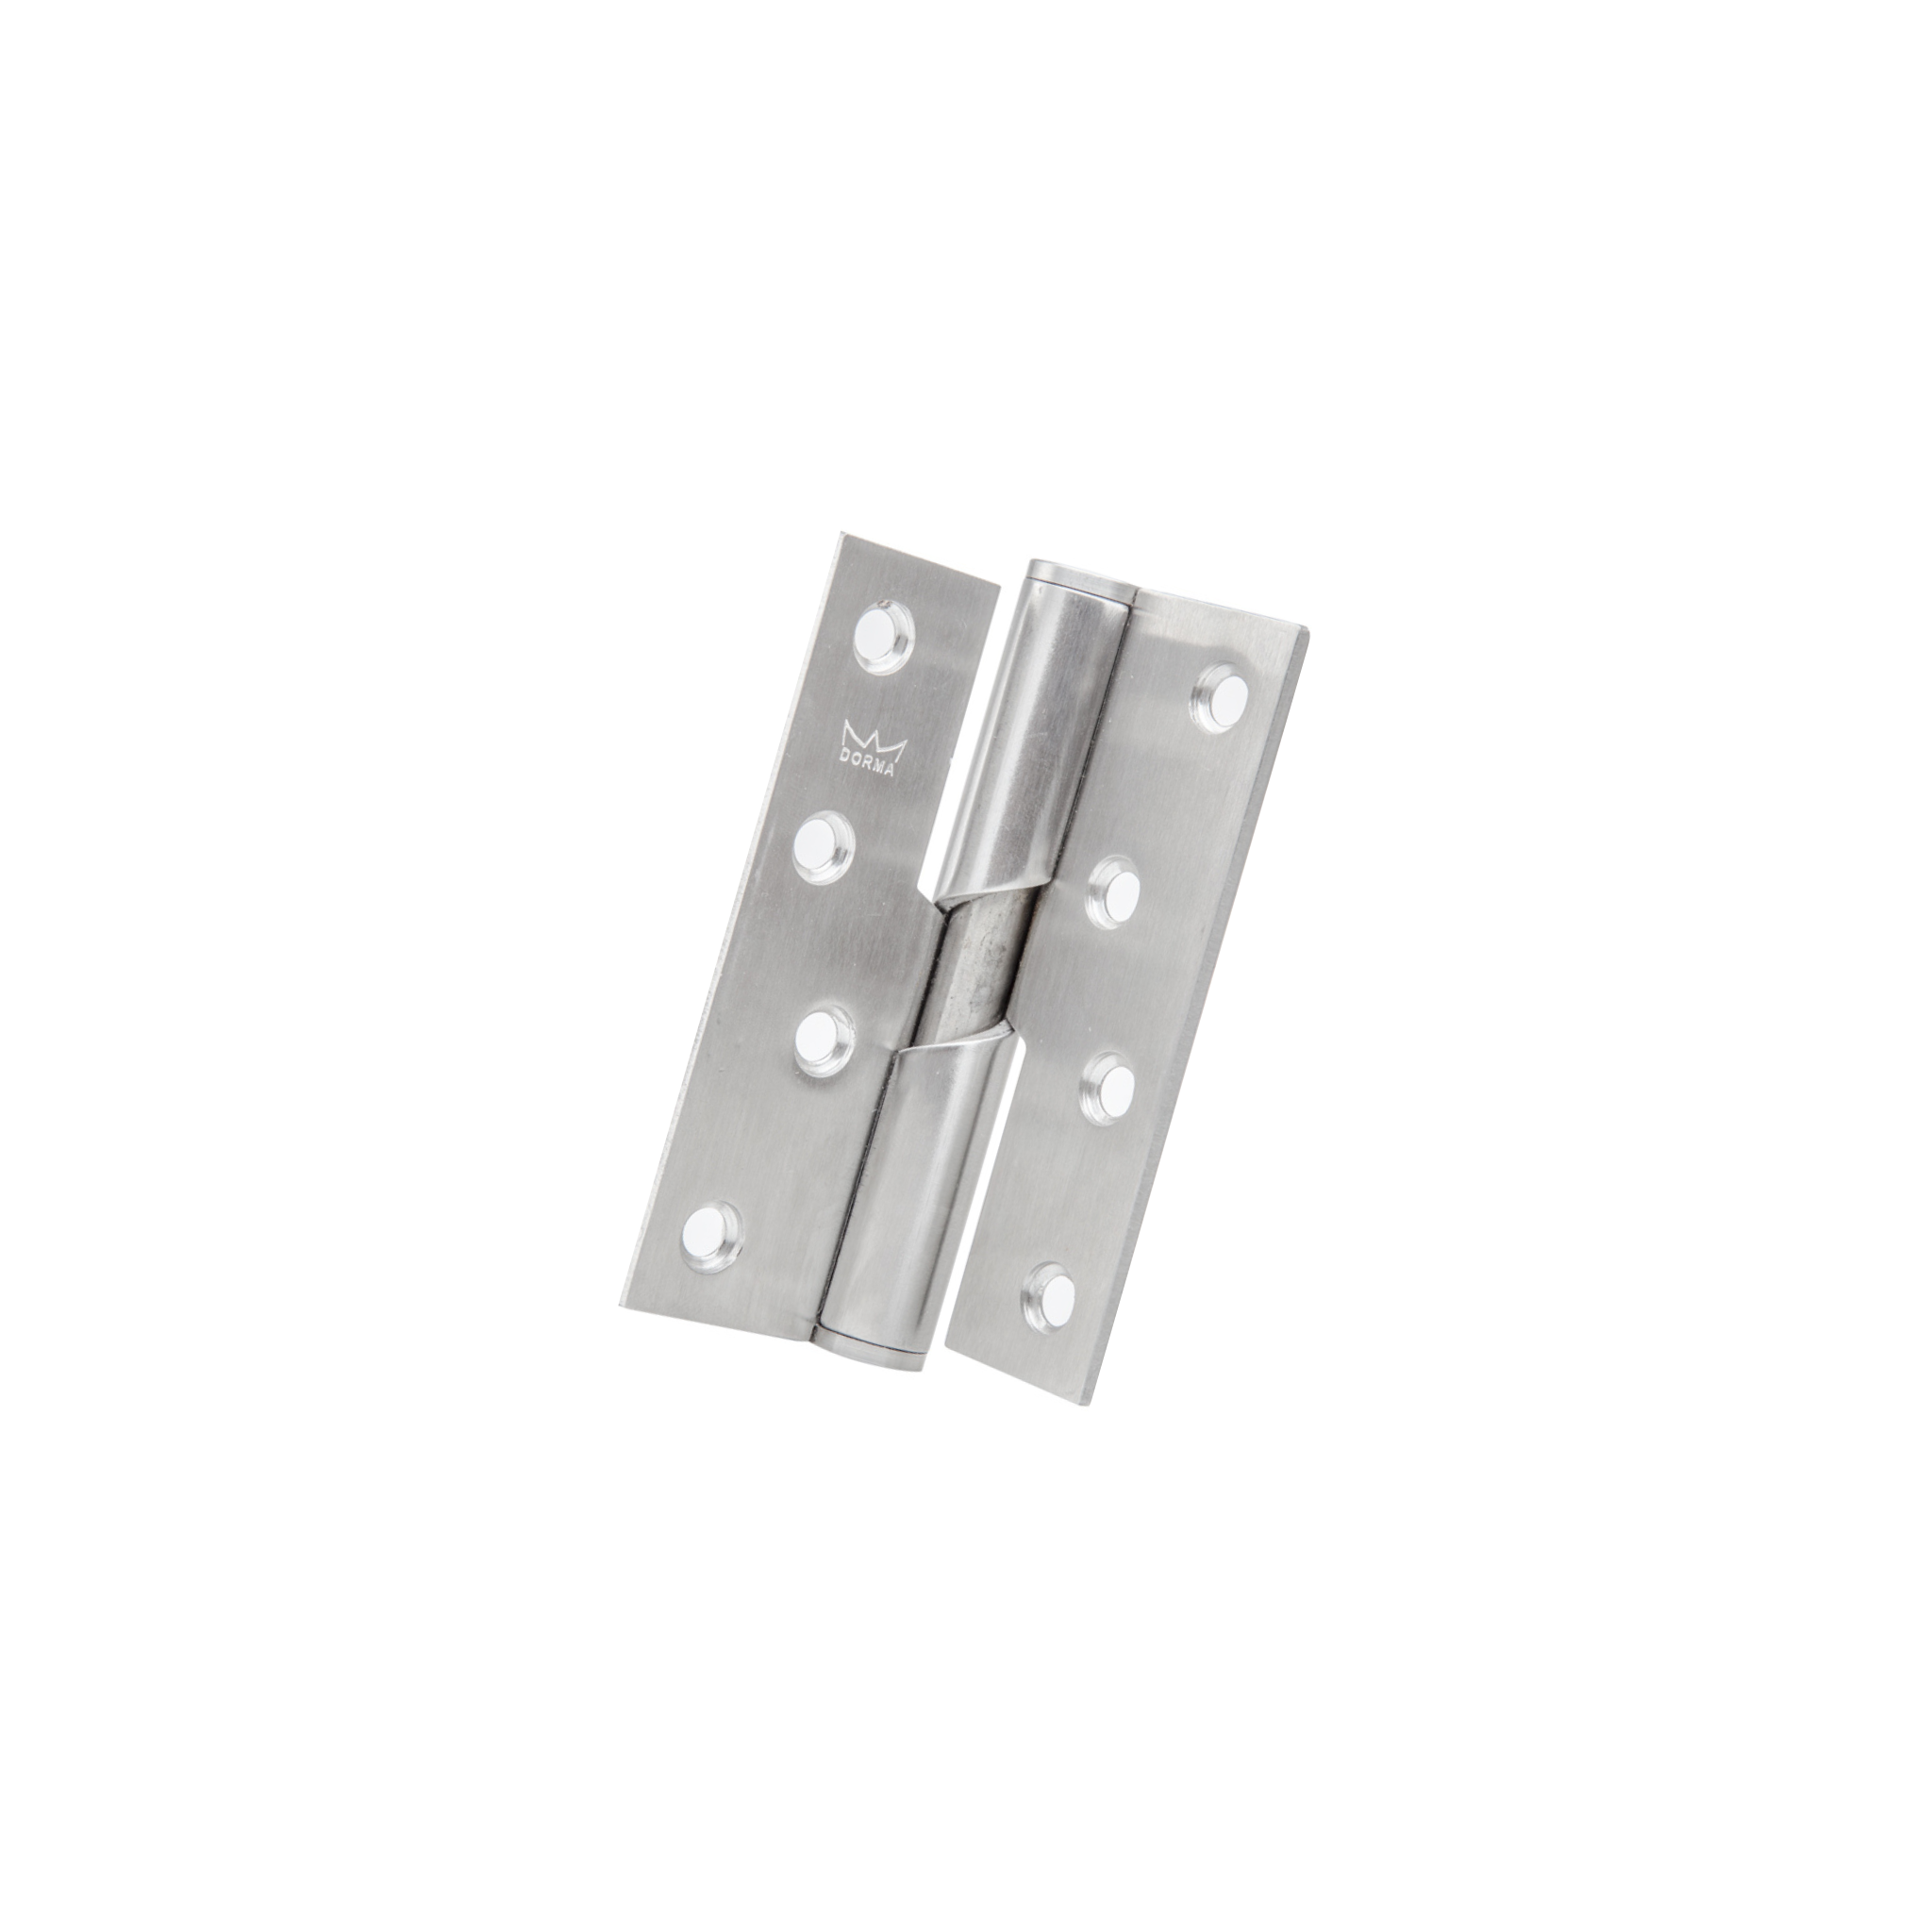 DRR-SS-012 (R) , Rising Butt Hinge, Right Hand, 2 x Hinges (1 Pair), Max Door Weight: 50kg, 102mm (h) x 75mm (w) x 3mm (t), Stainless Steel, DORMAKABA